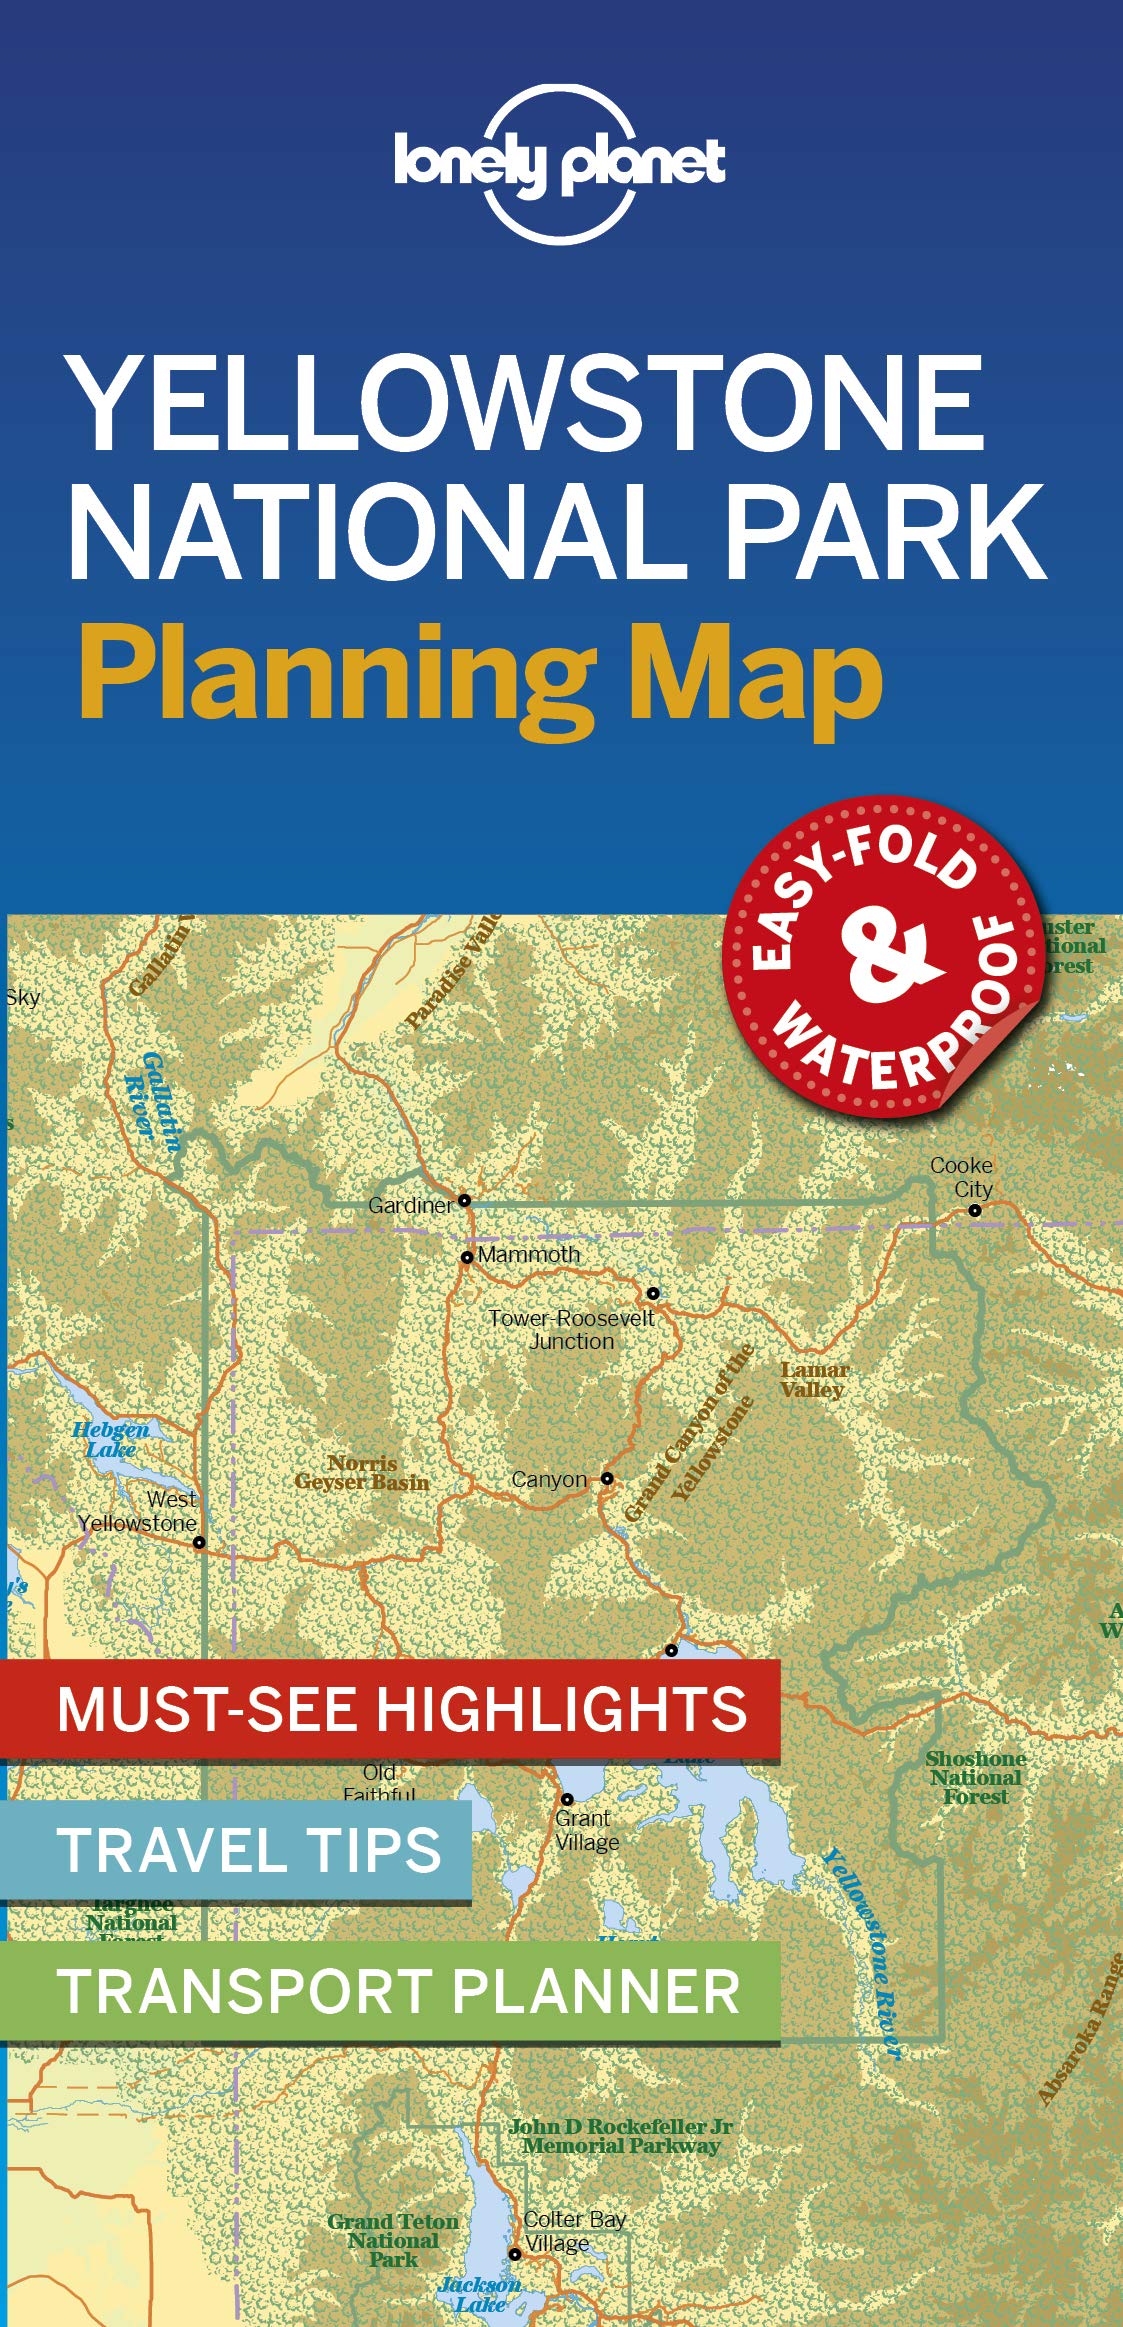 Yellowstone National Park Planning Map 1e